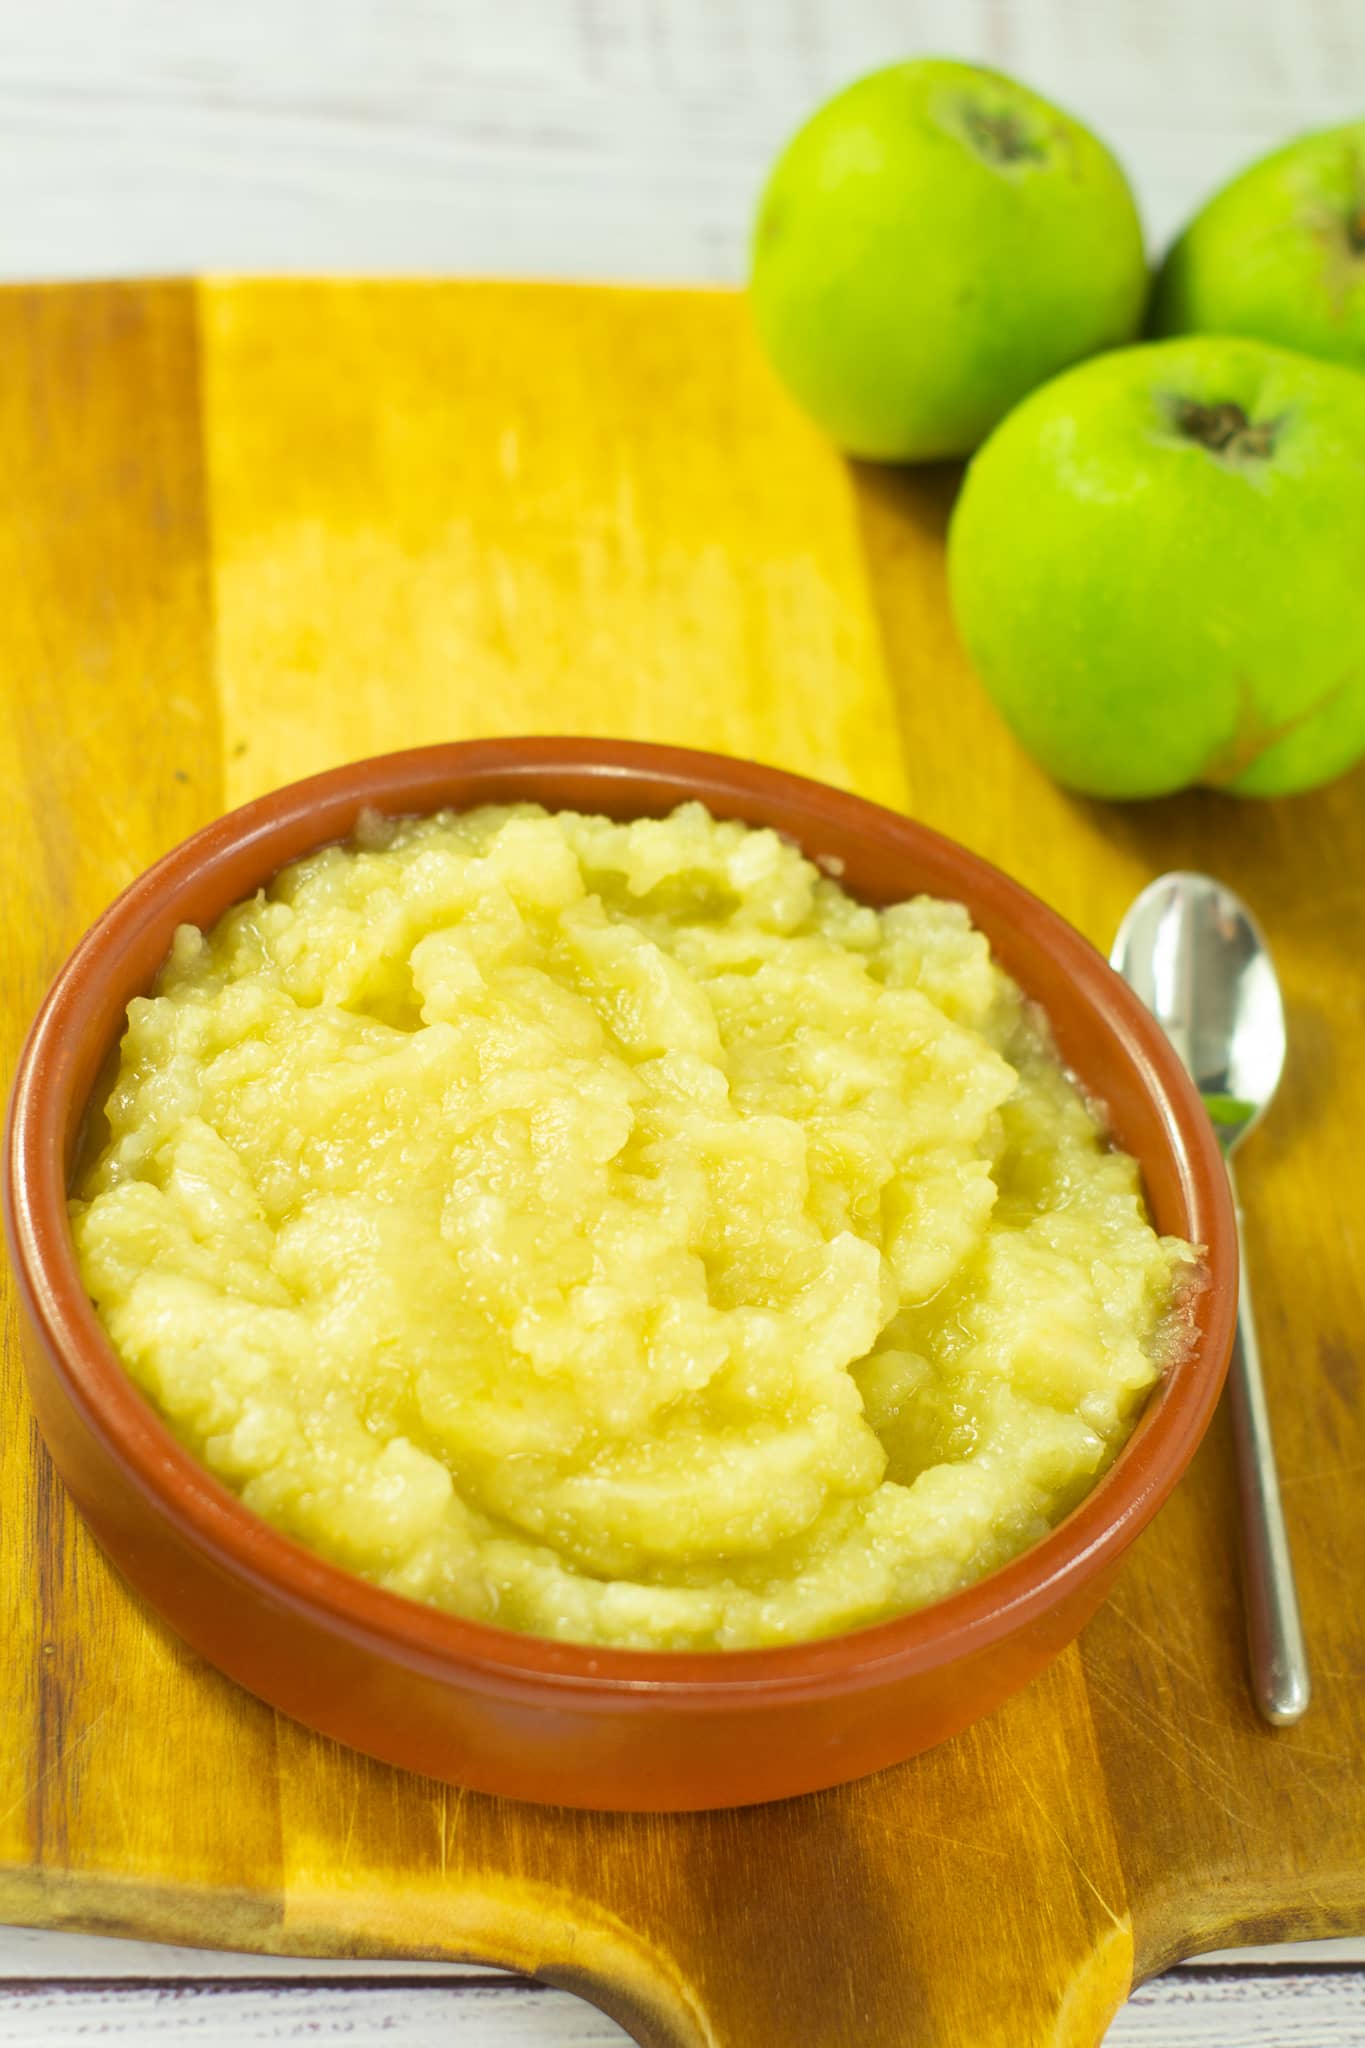 apple sauce sitting in a dish on a wooden chopping board with apples in the background